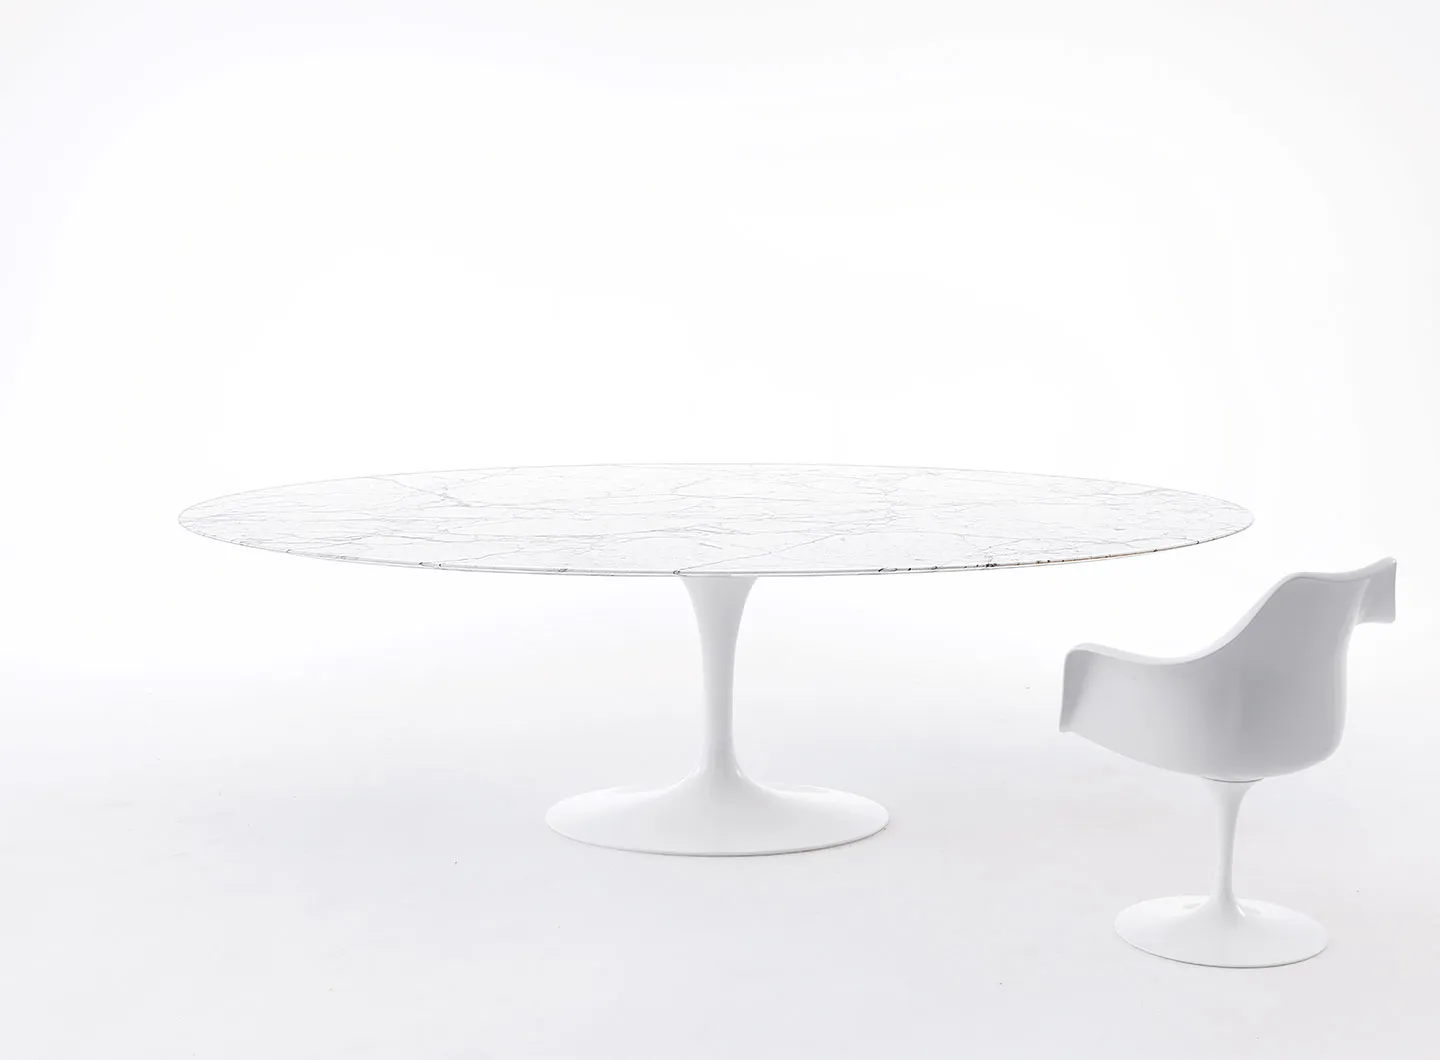 Pedestal Collection designed by Eero Saarinen, Ph. Courtesy of Knoll